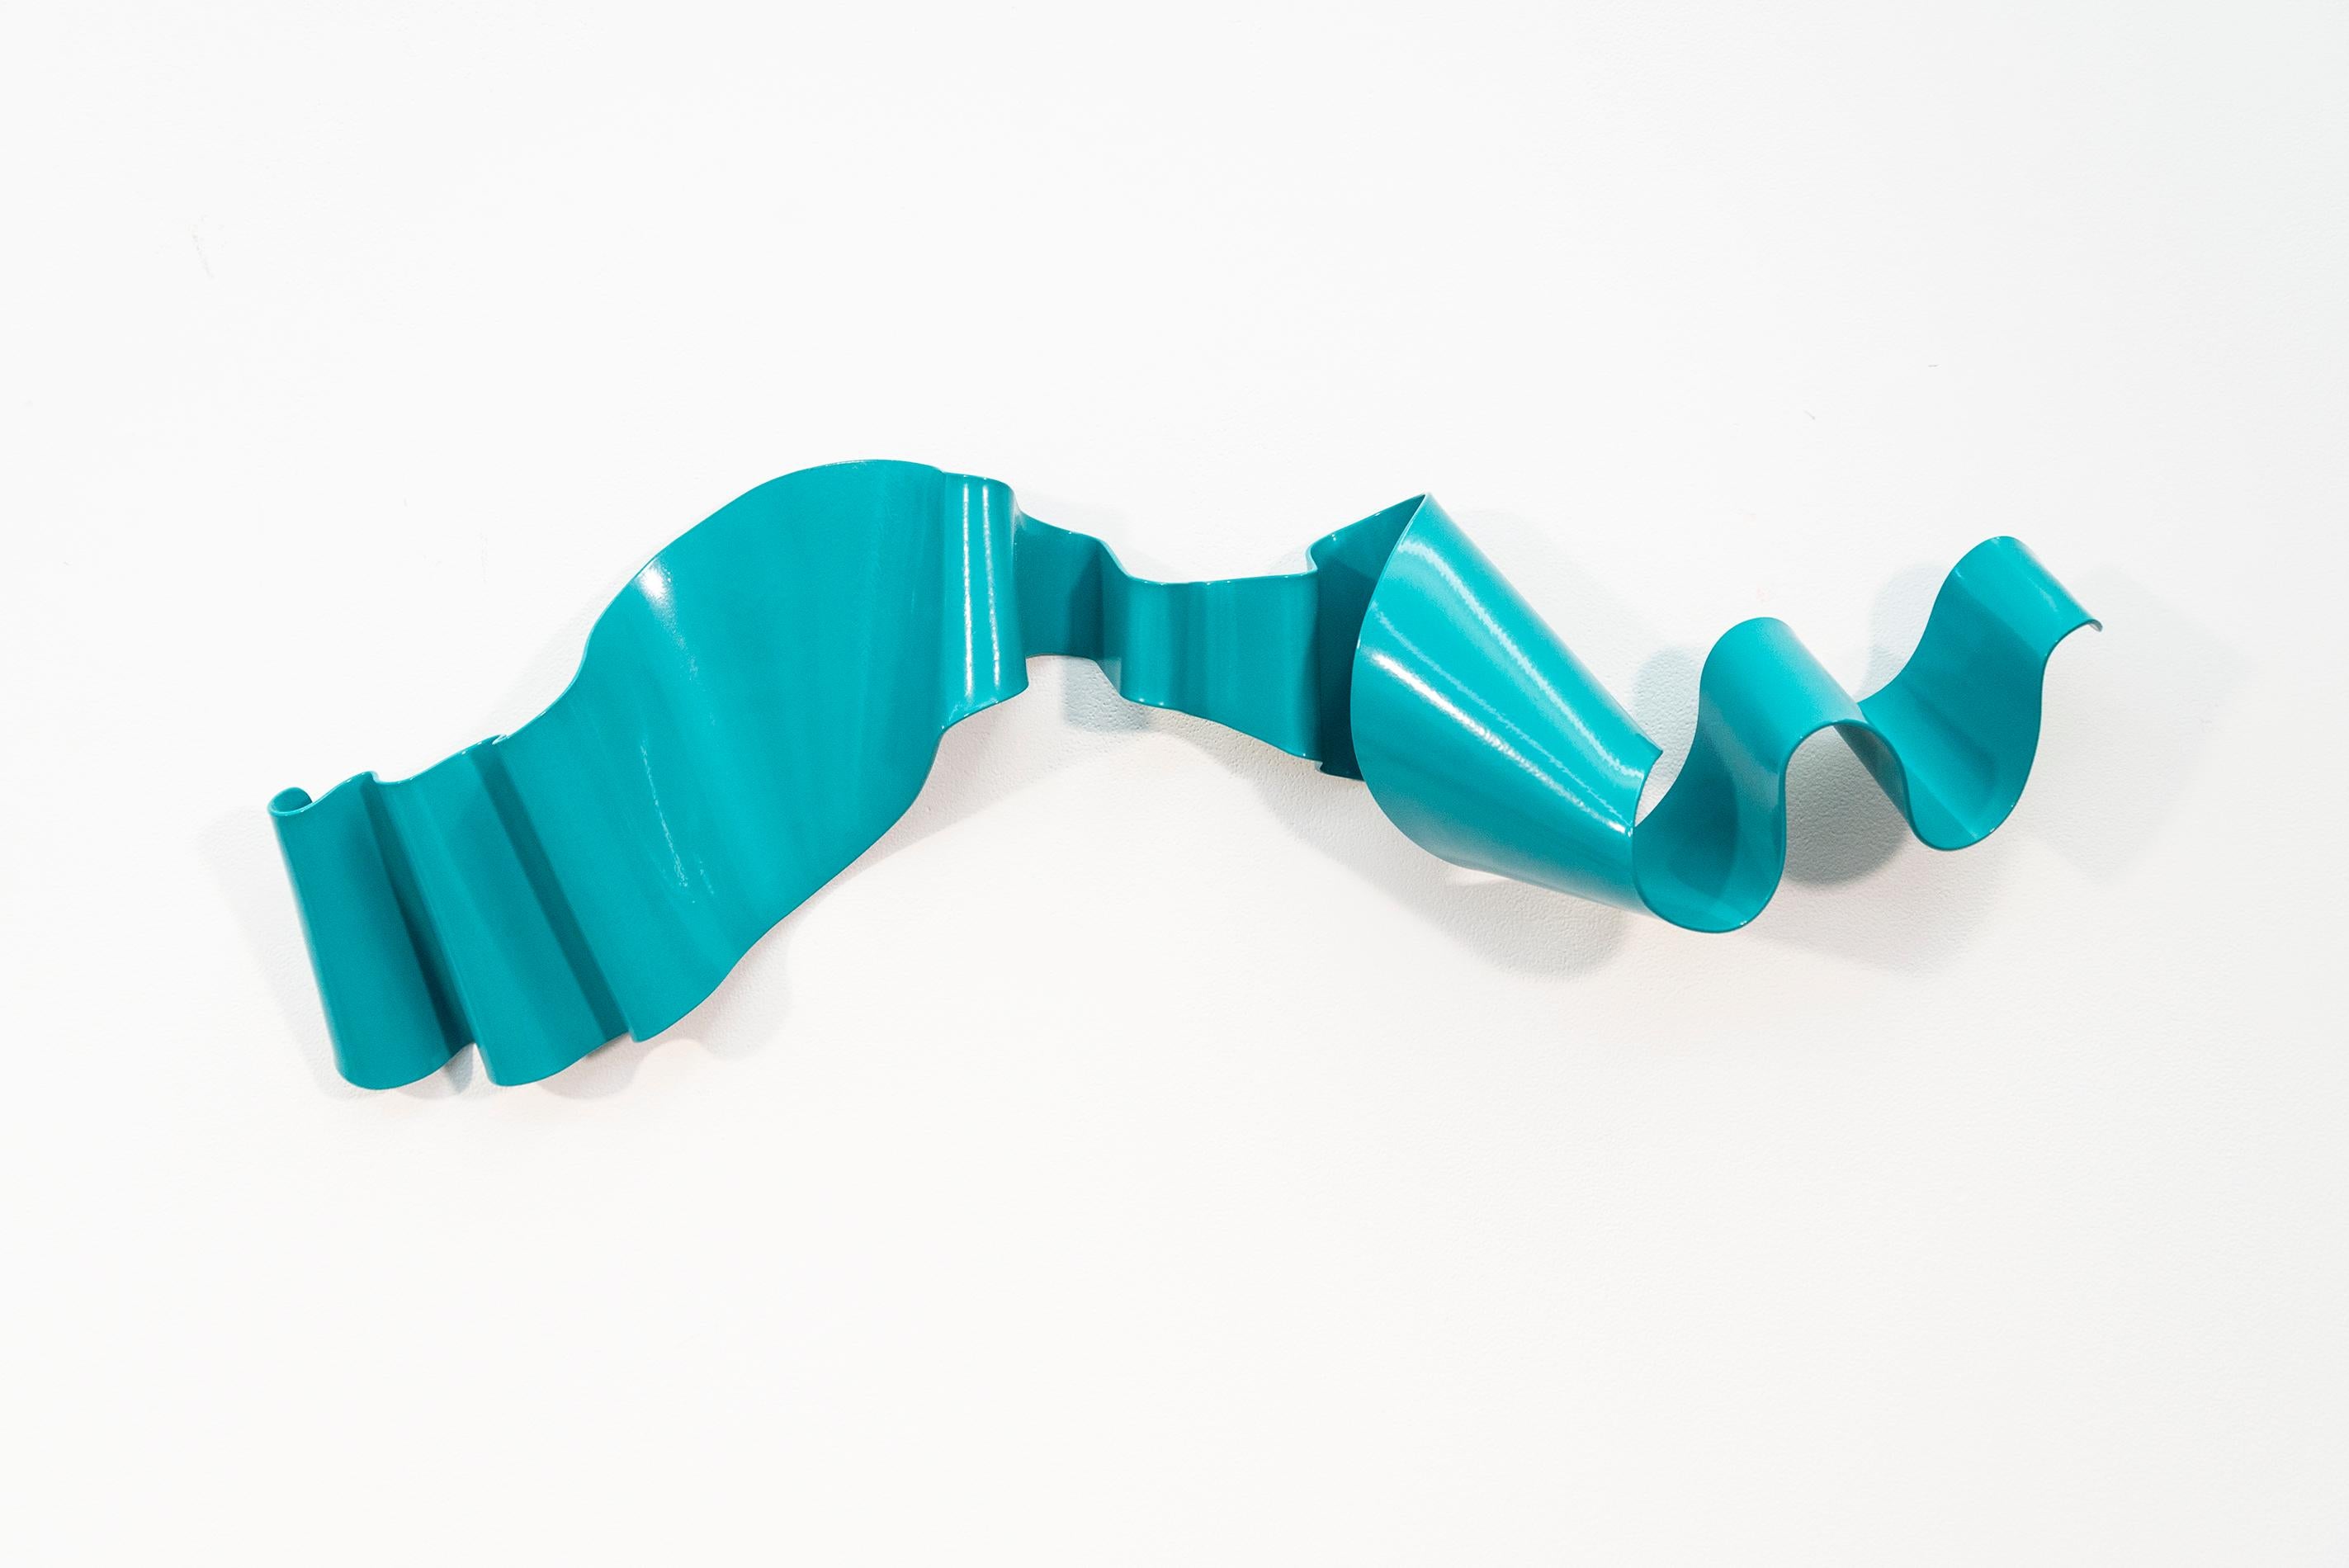 Stefan Duerst Abstract Sculpture - Soul Gate 46 - glossy, contemporary, ribbon, powder coated steel, wall sculpture